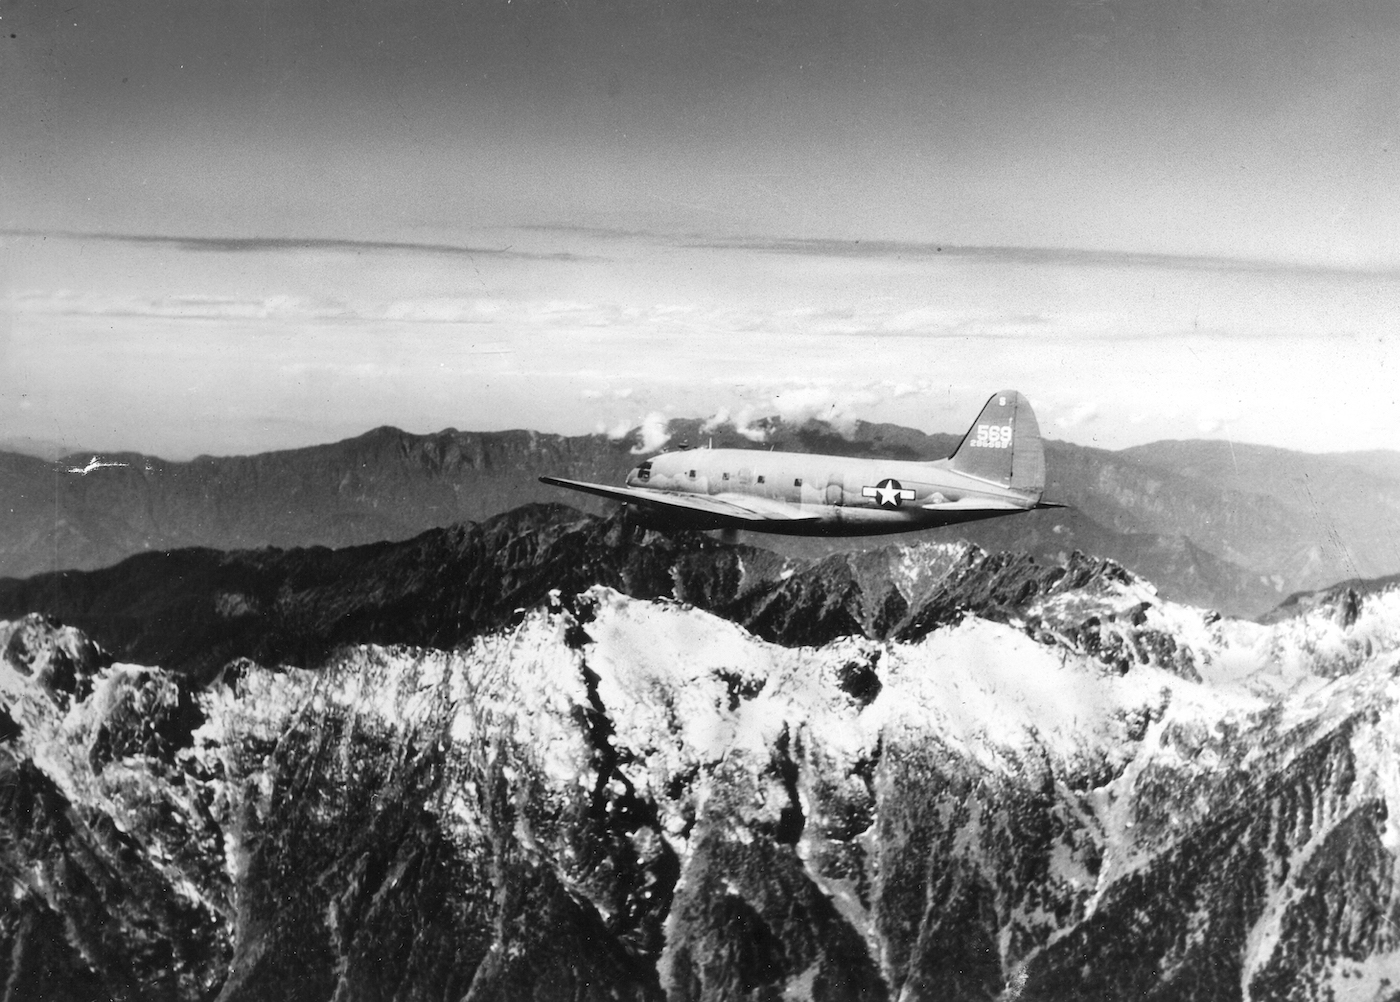 View of a US Army Air Transport Command cargo plane as it flies over the snow-capped, towering mountains of the Himalayas, along the borders of India, China, and Burma.